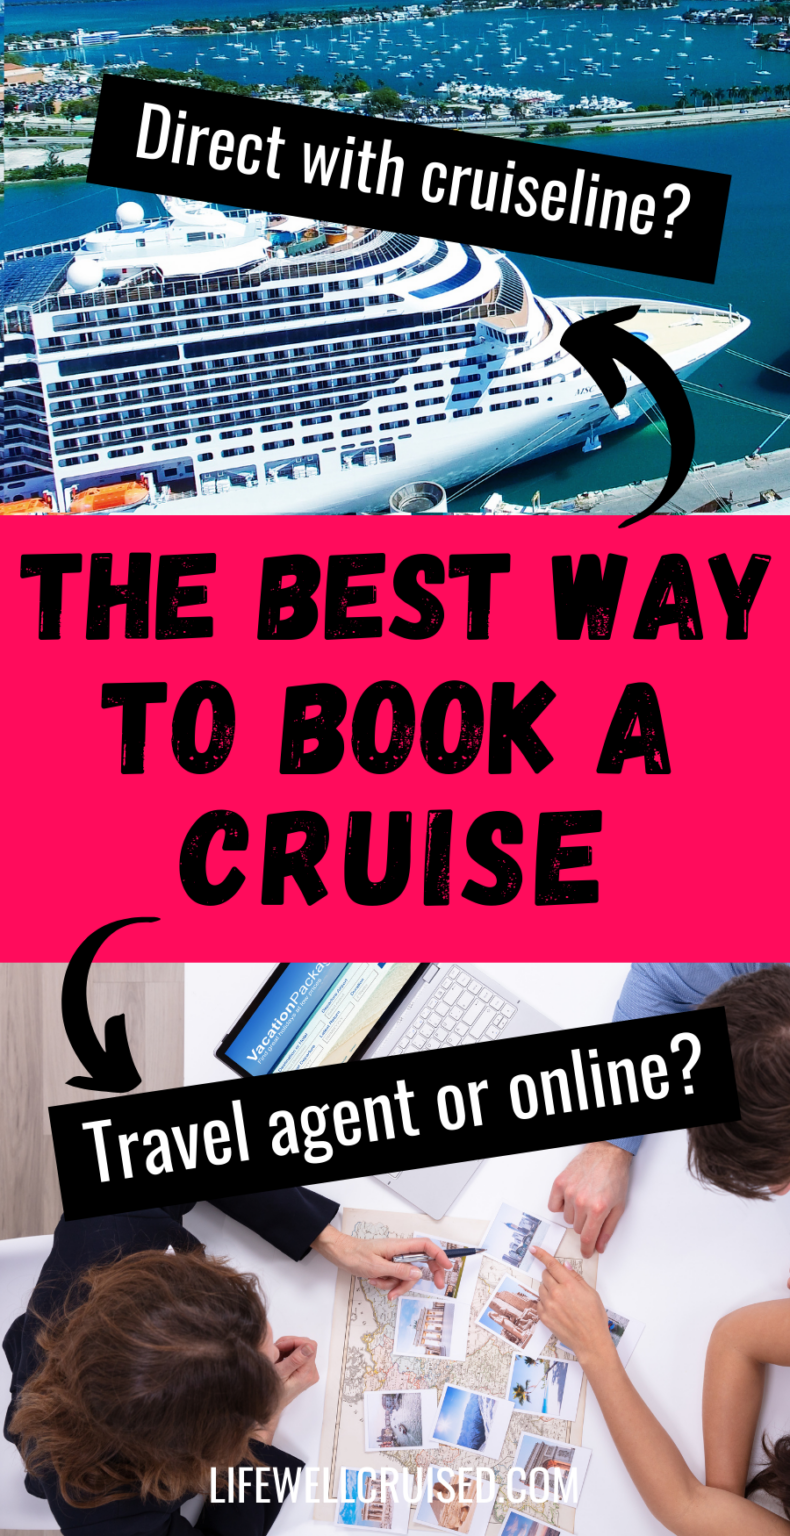 book cruise direct or travel agent